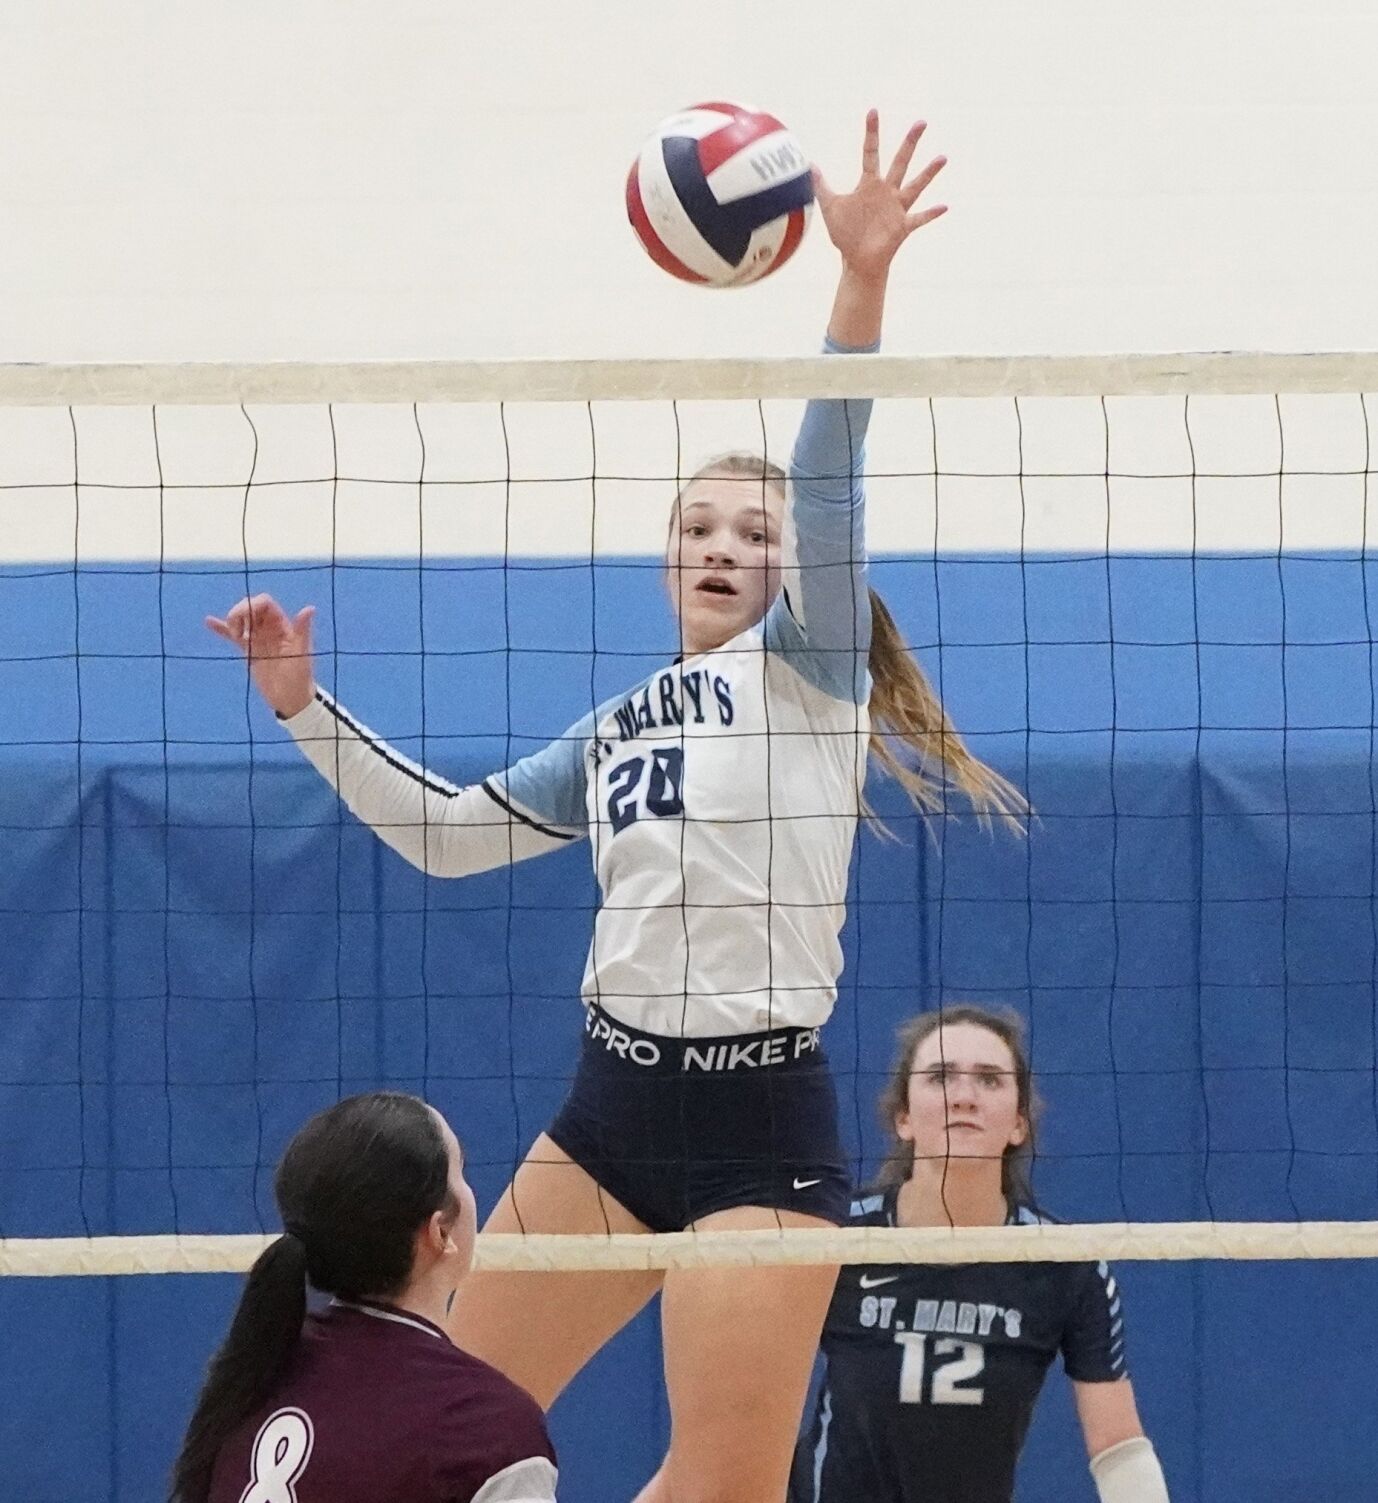 St. Mary’s Girls Volleyball Team Secures Third Consecutive Catholic State Championship with Impressive Victory